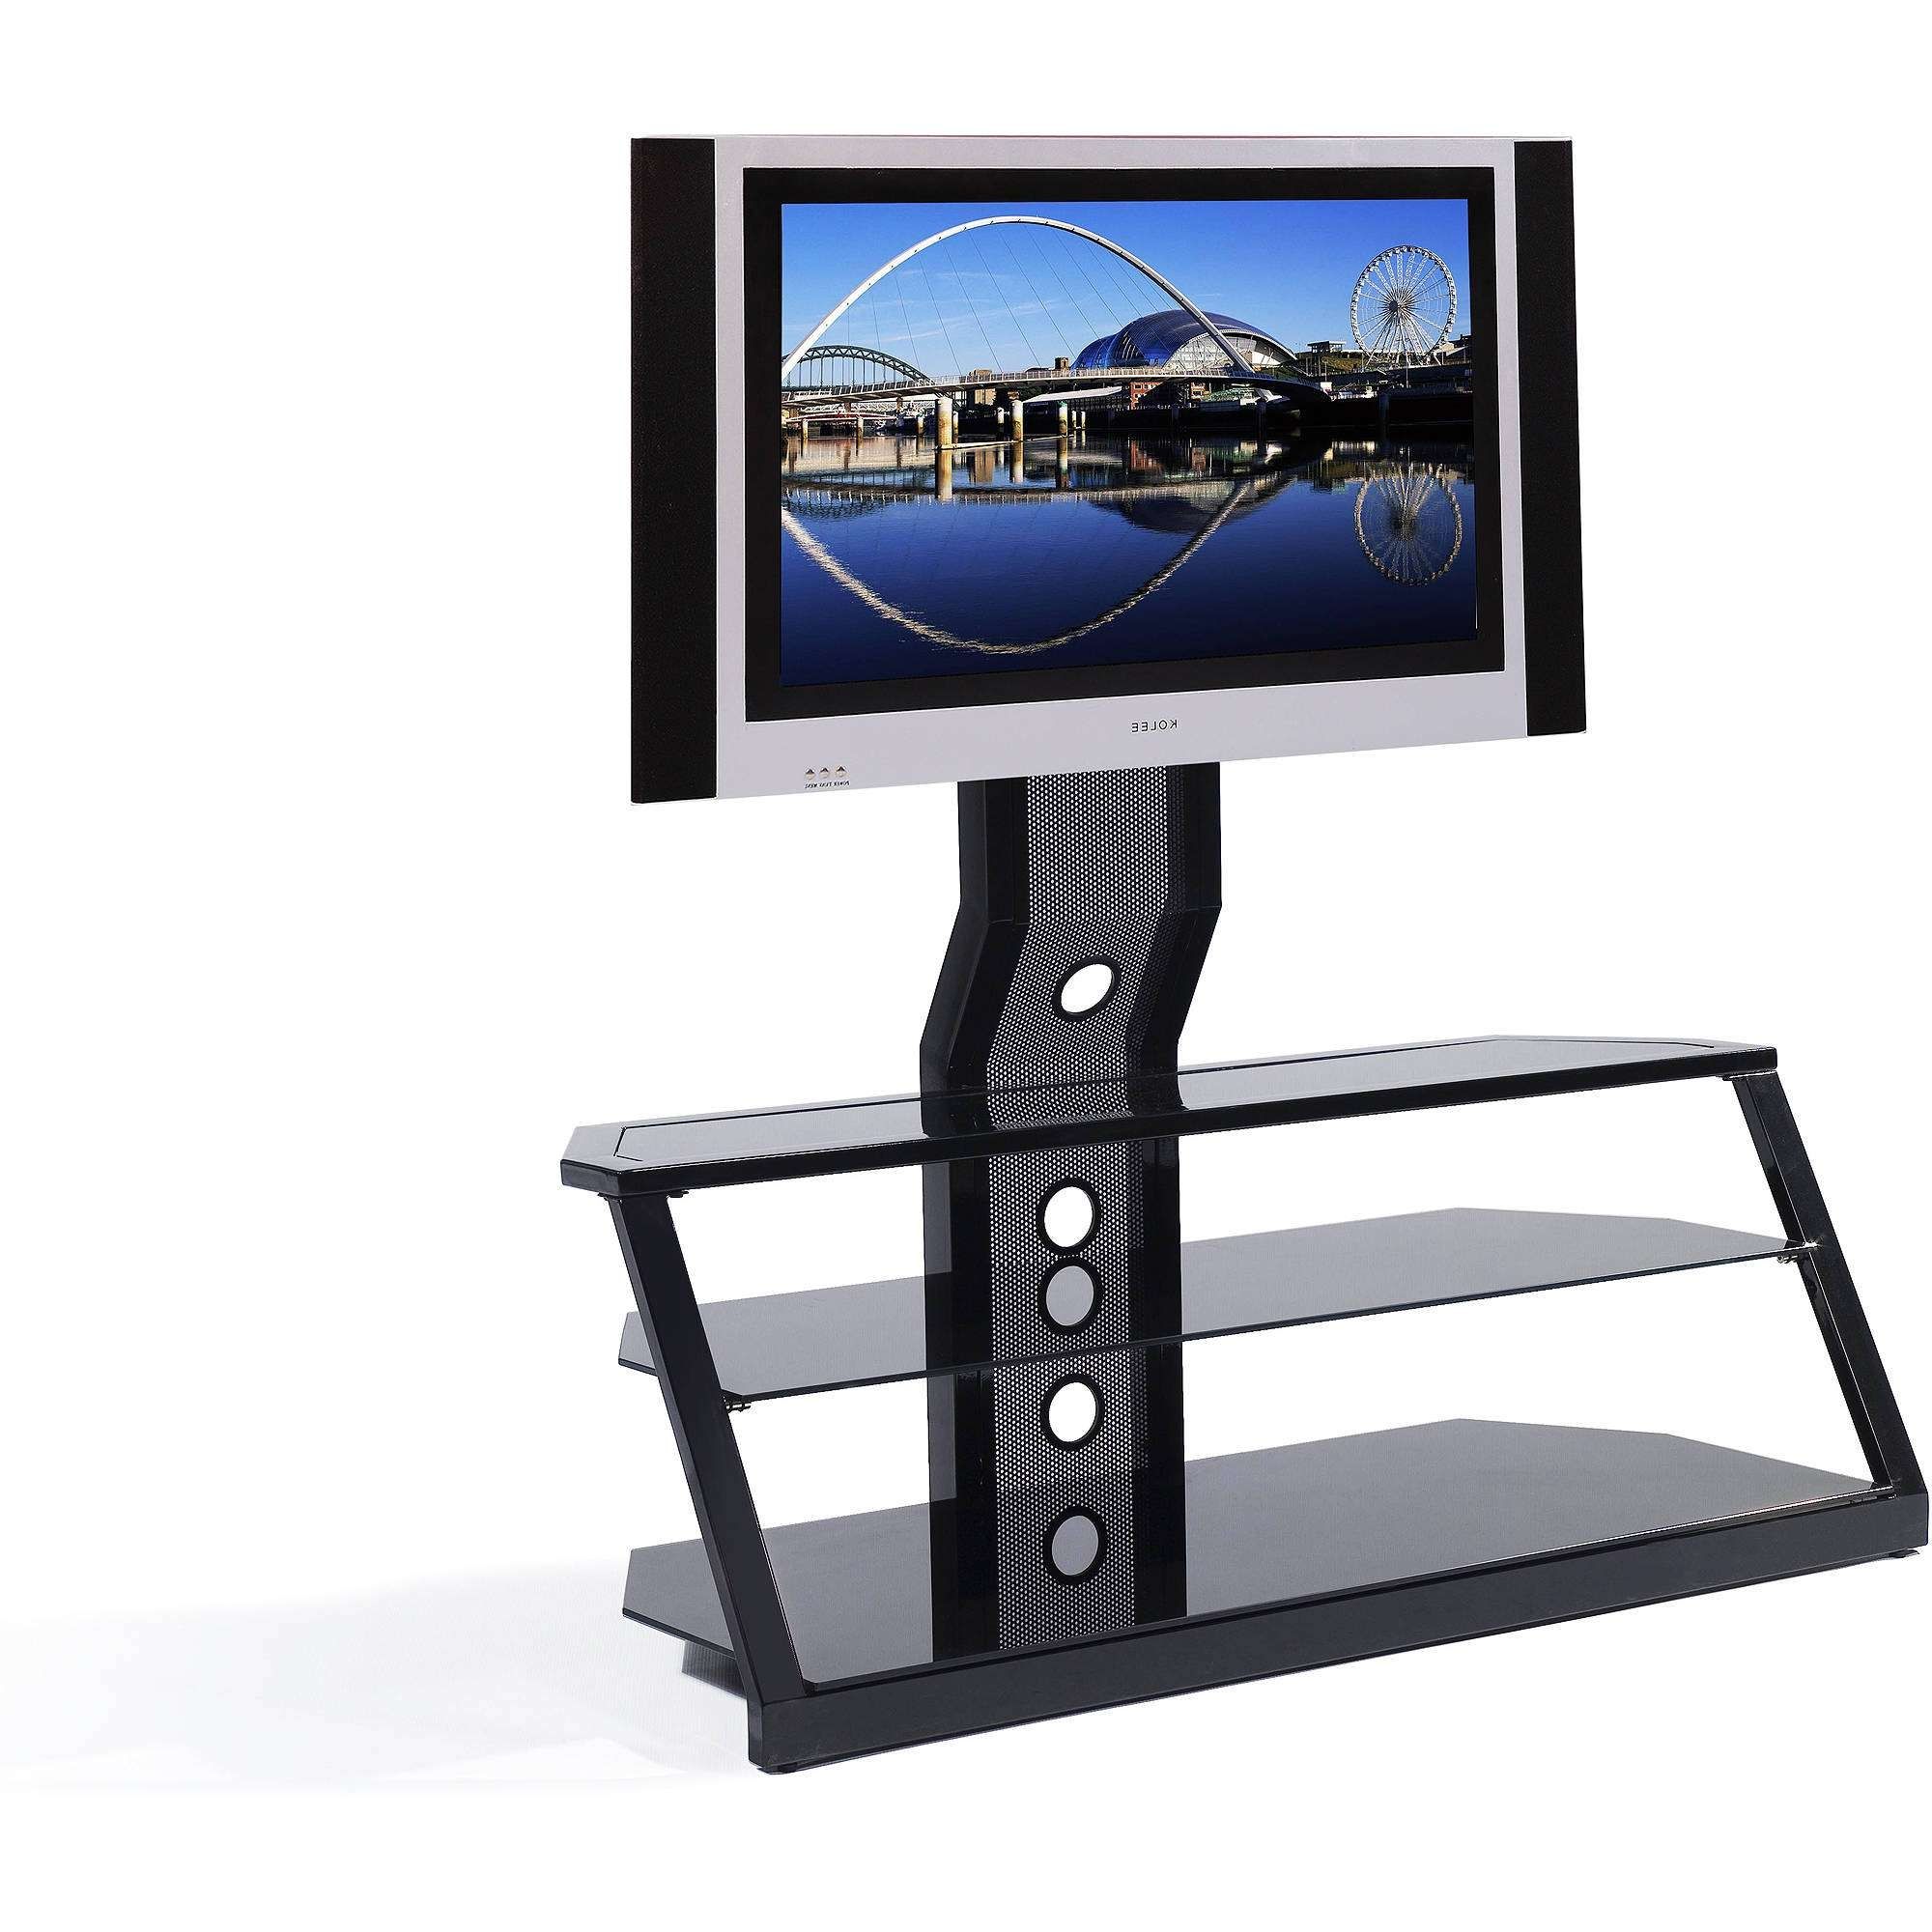 Cordoba Tv Stand With Mount, For Tvs Up To 52" – Walmart Pertaining To Cordoba Tv Stands (View 1 of 15)